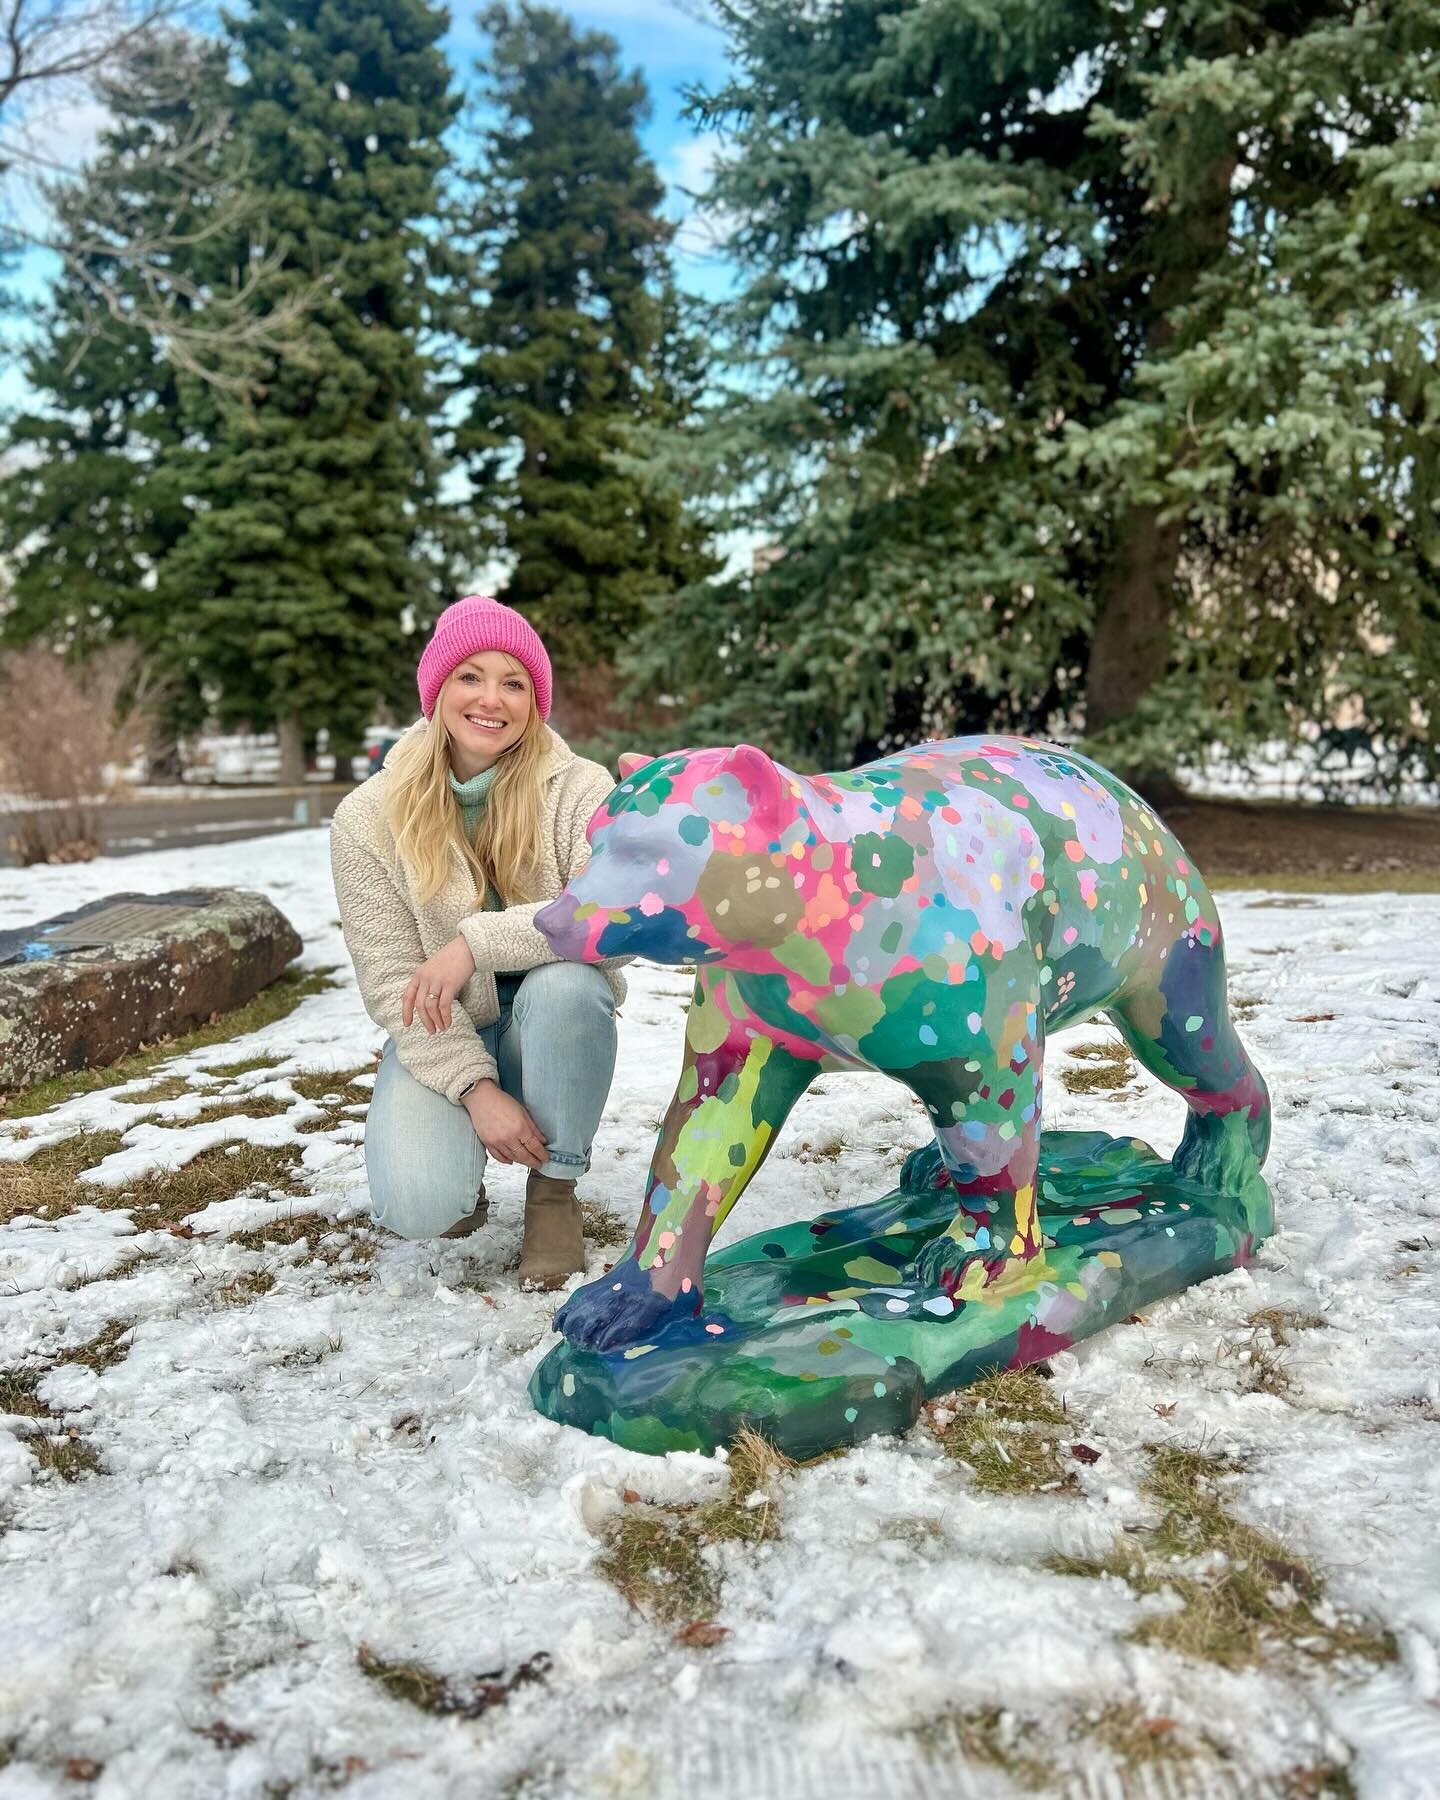 First time painting in 3d! &quot;Wildflower Spirit Bear&quot; - my creation for Colorado Chautaqua's Art in the Park. I was honored to be chosen as one of 15 artists to transform a fiberglass bear into a work of art. The bears are on display now unti